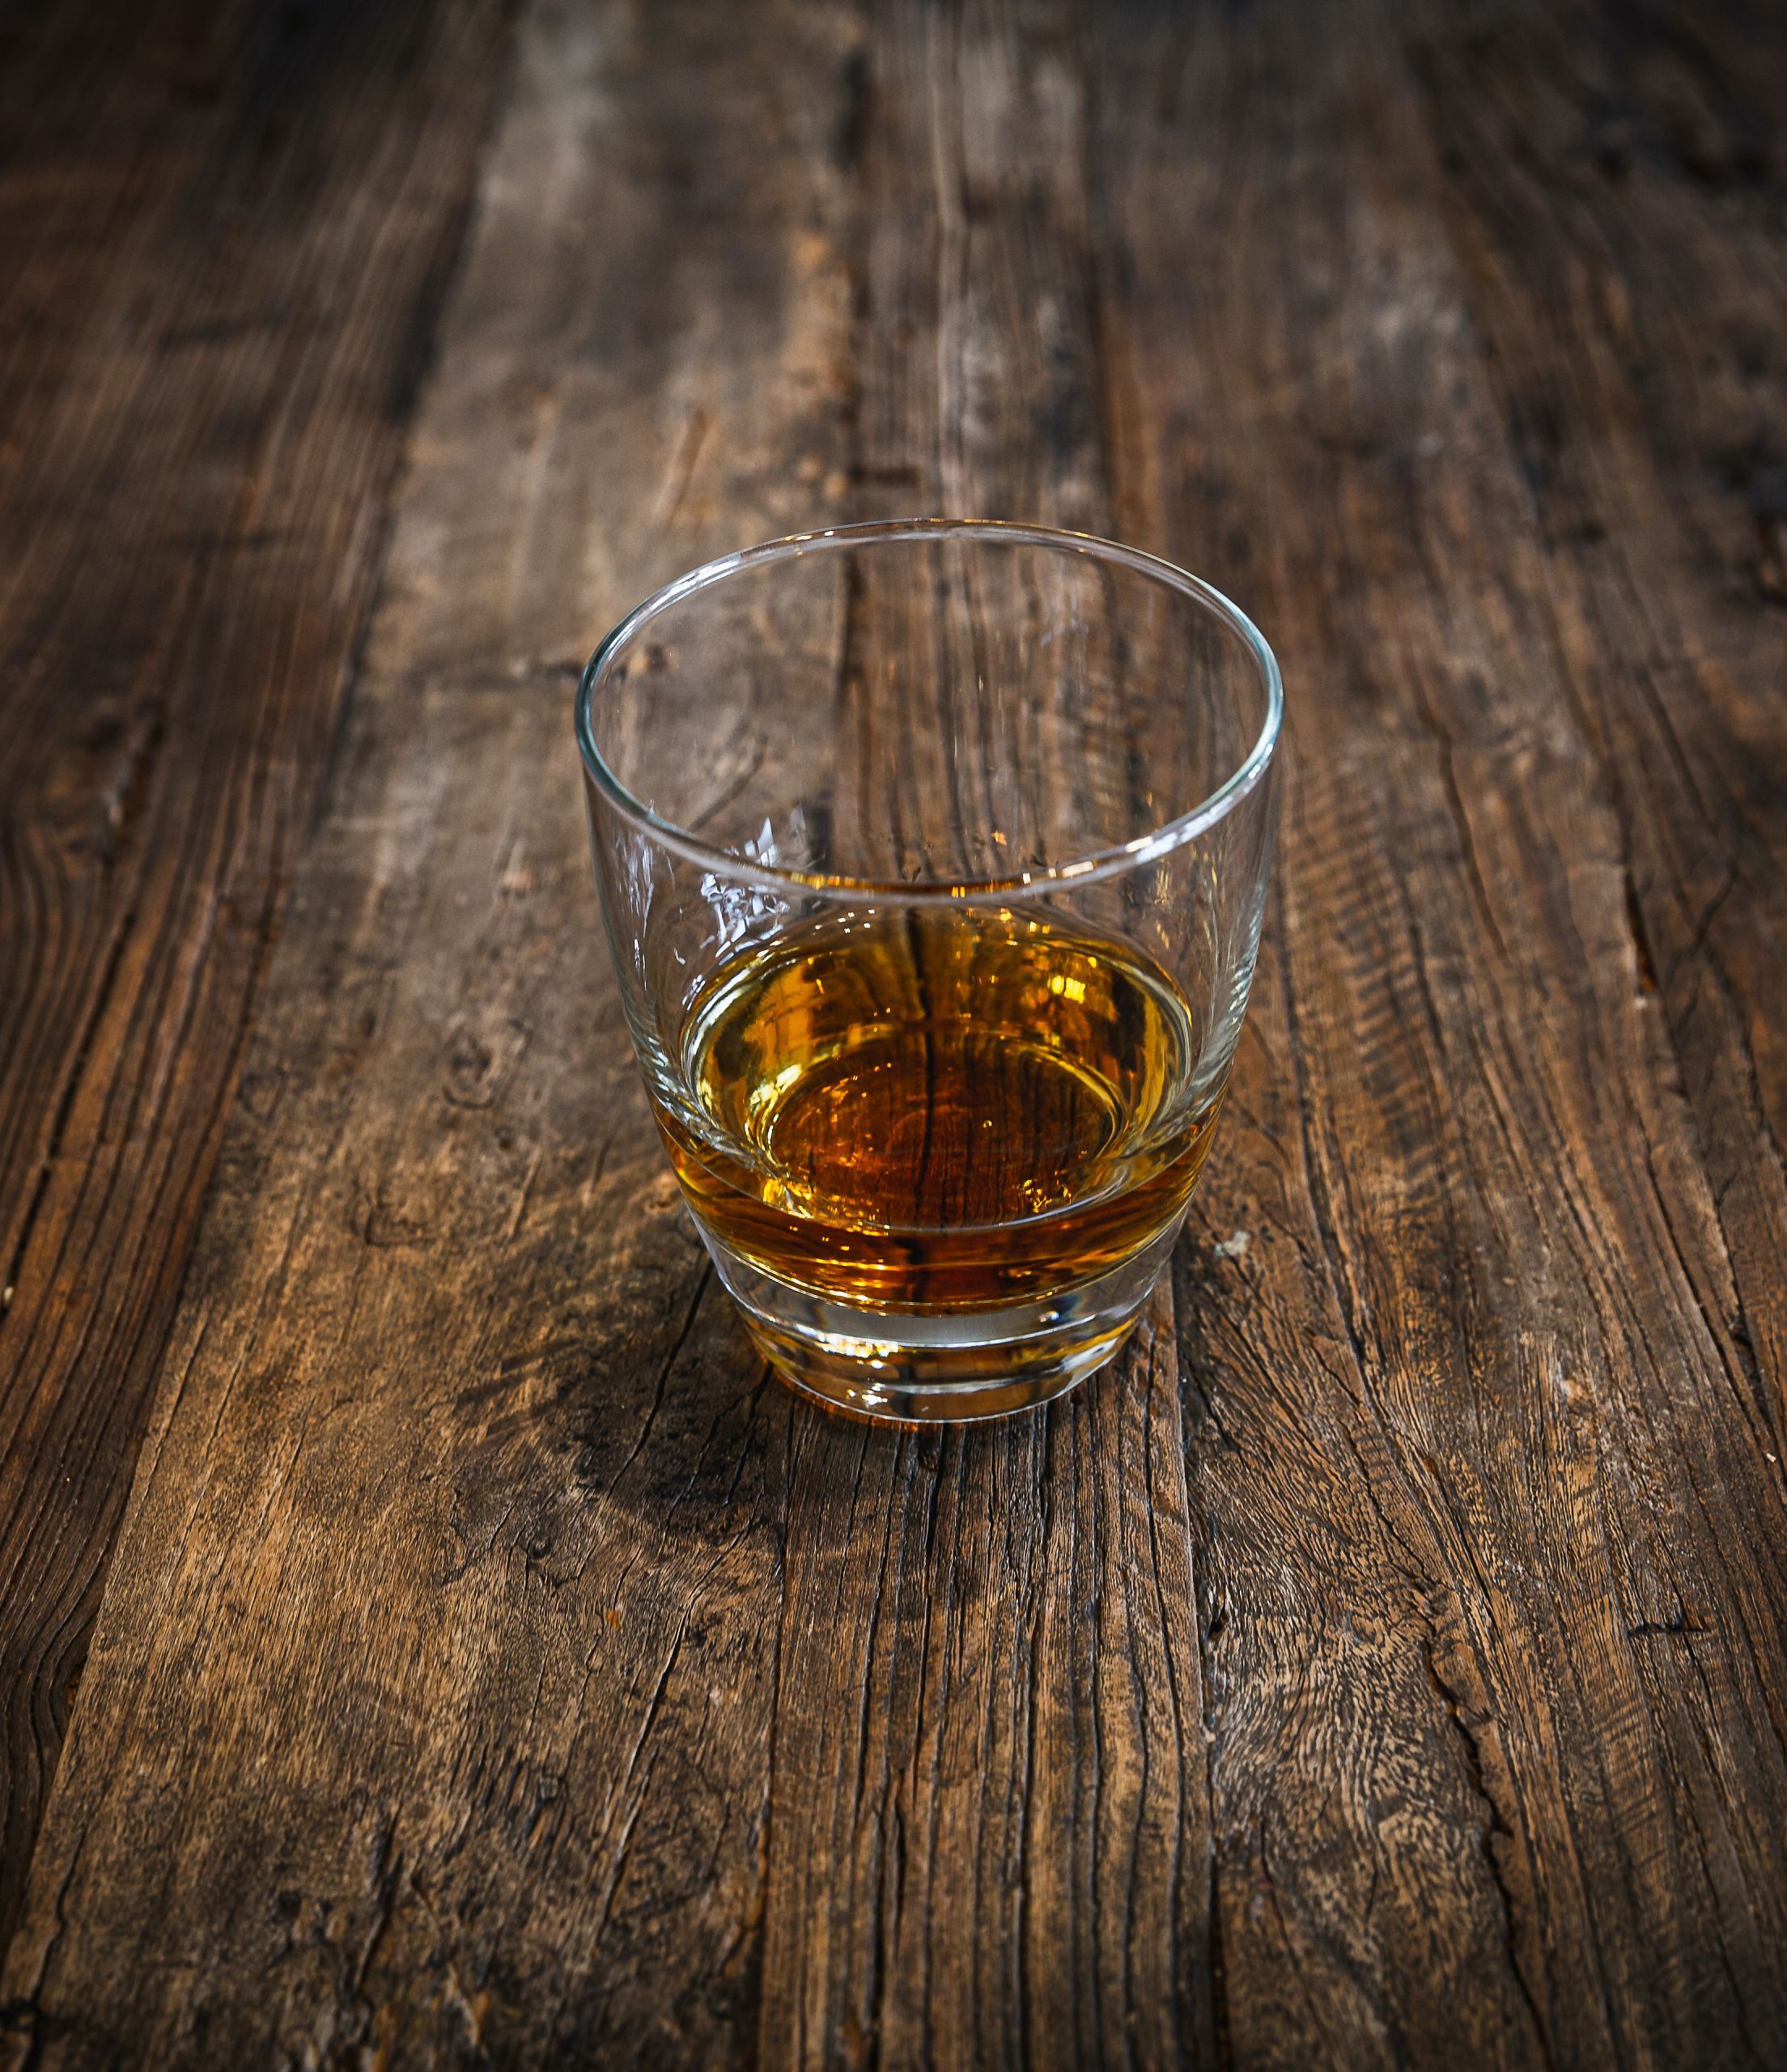 The Ice-In-Scotch Lie You Shouldn't Fall For Anymore